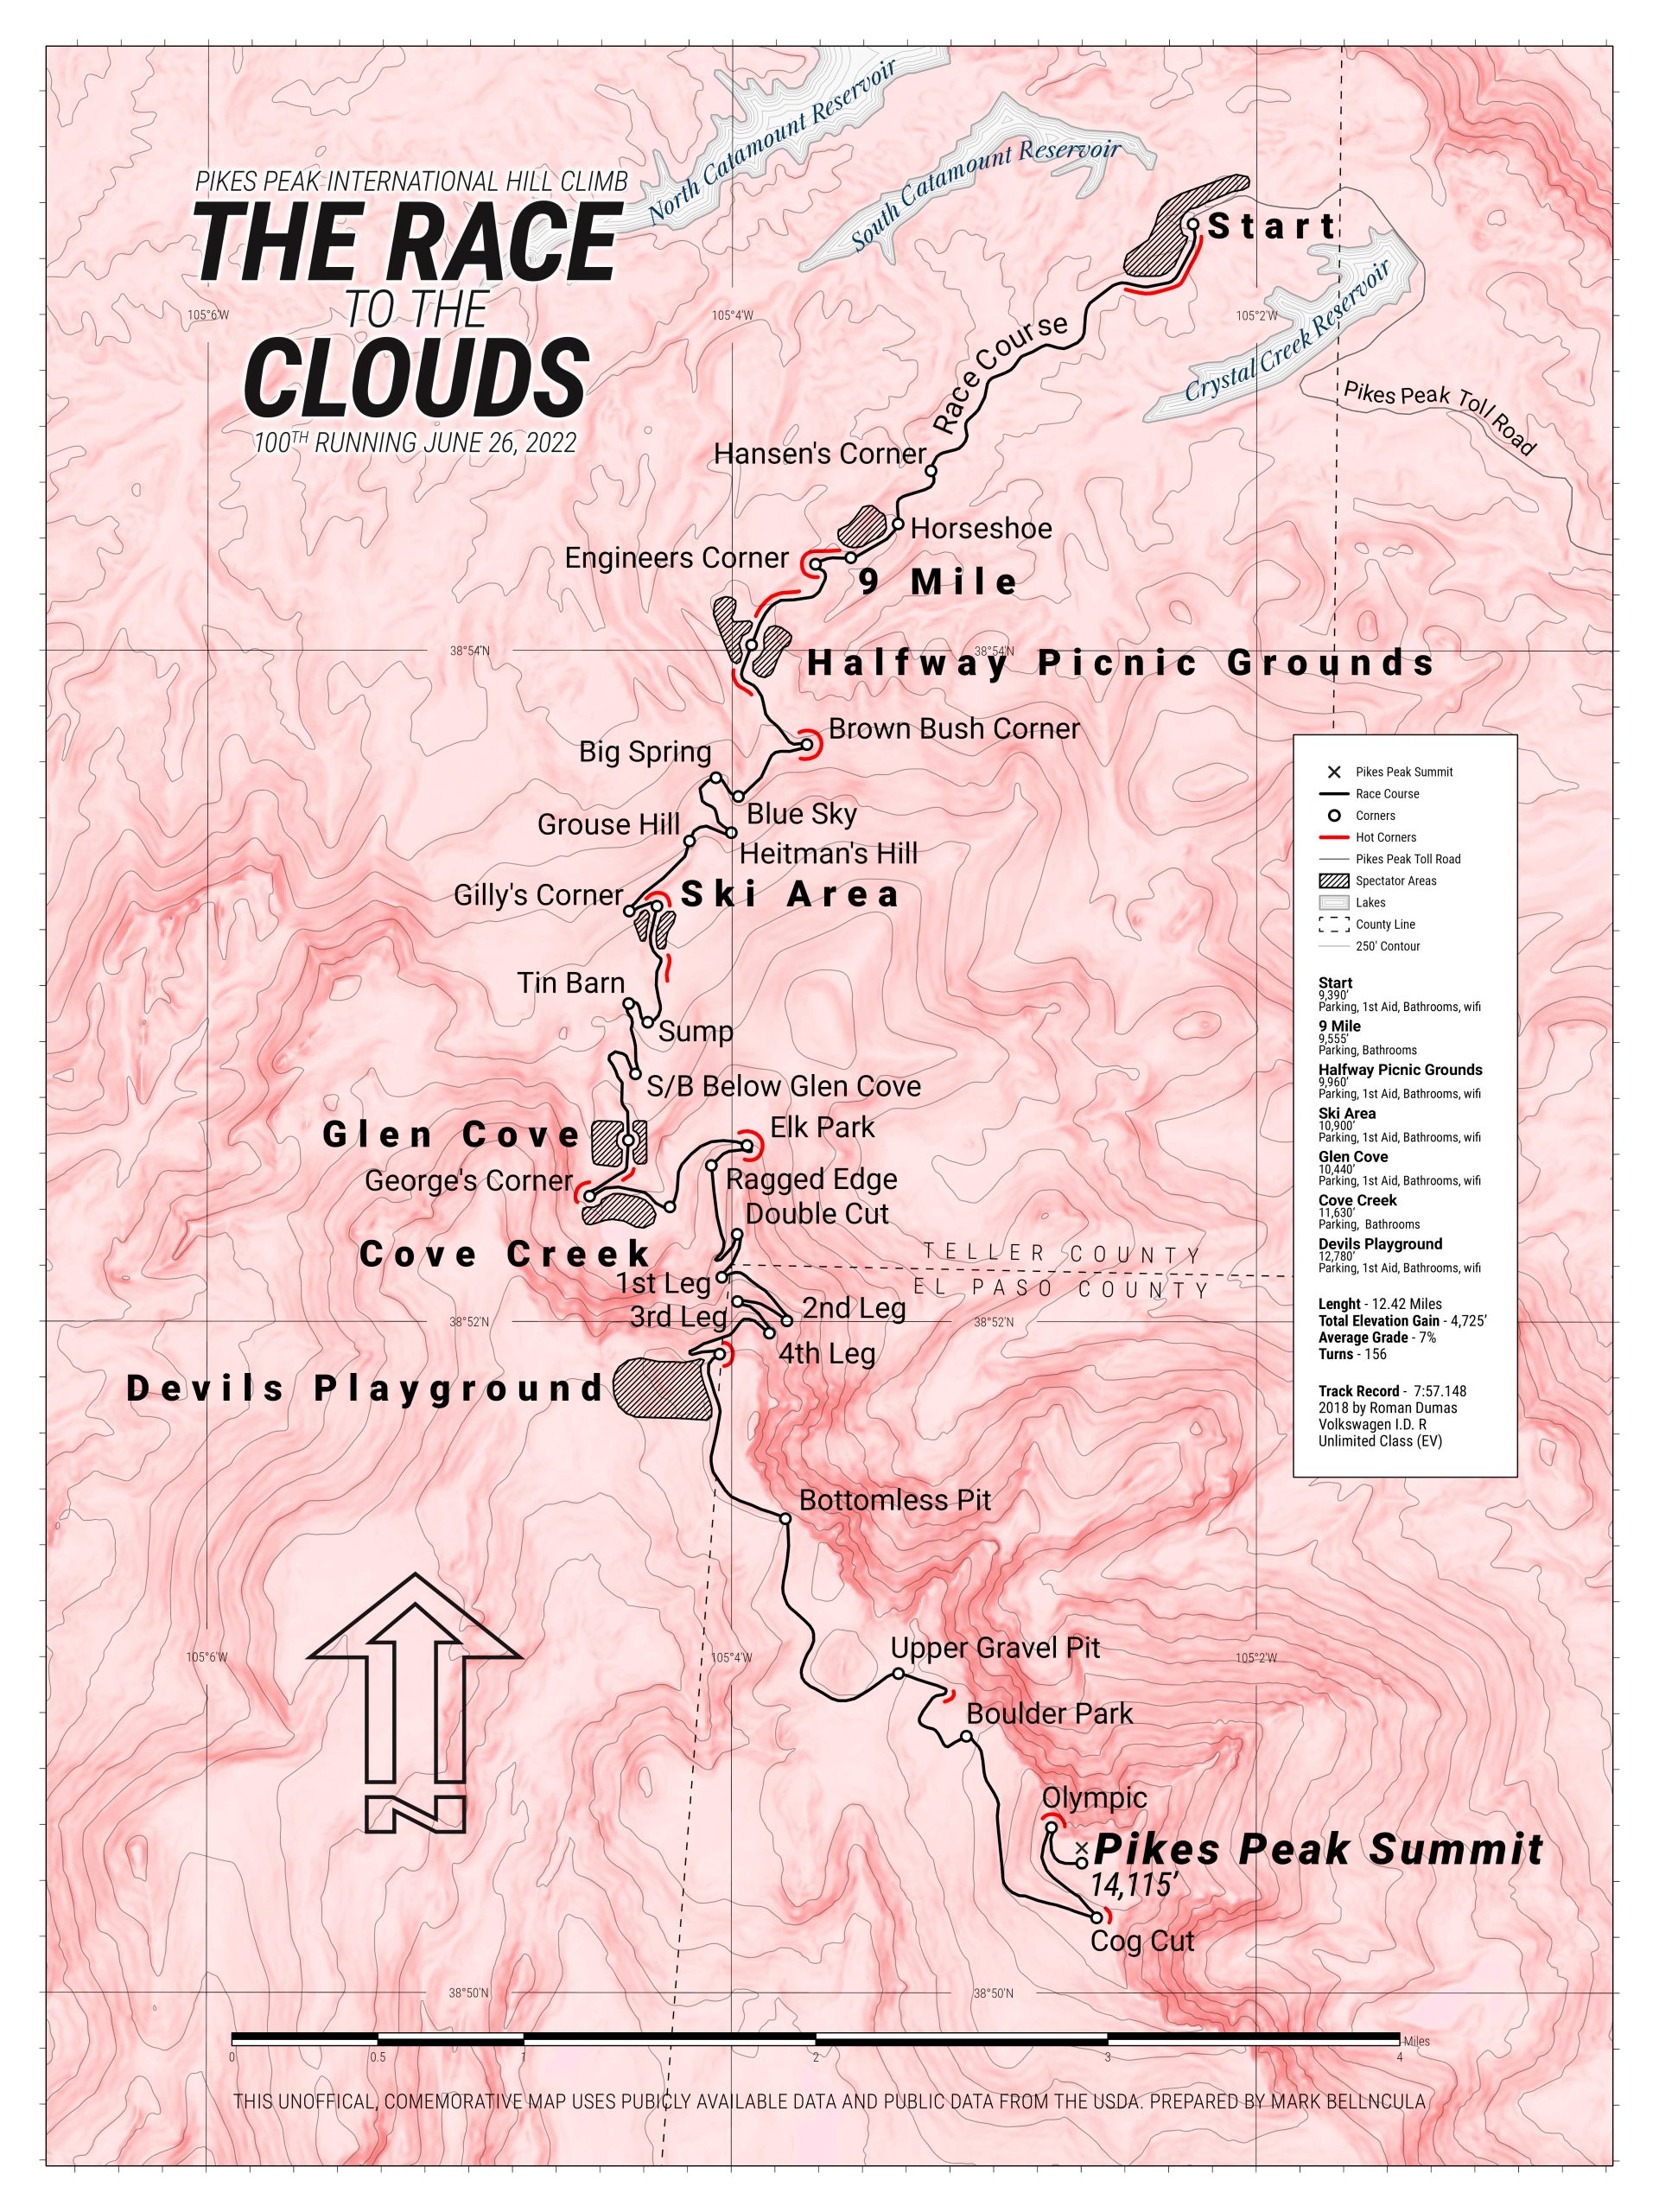 The Race to the Clouds - 100th Running of the Pikes Peak International Hill Climb, Mark Bellncula